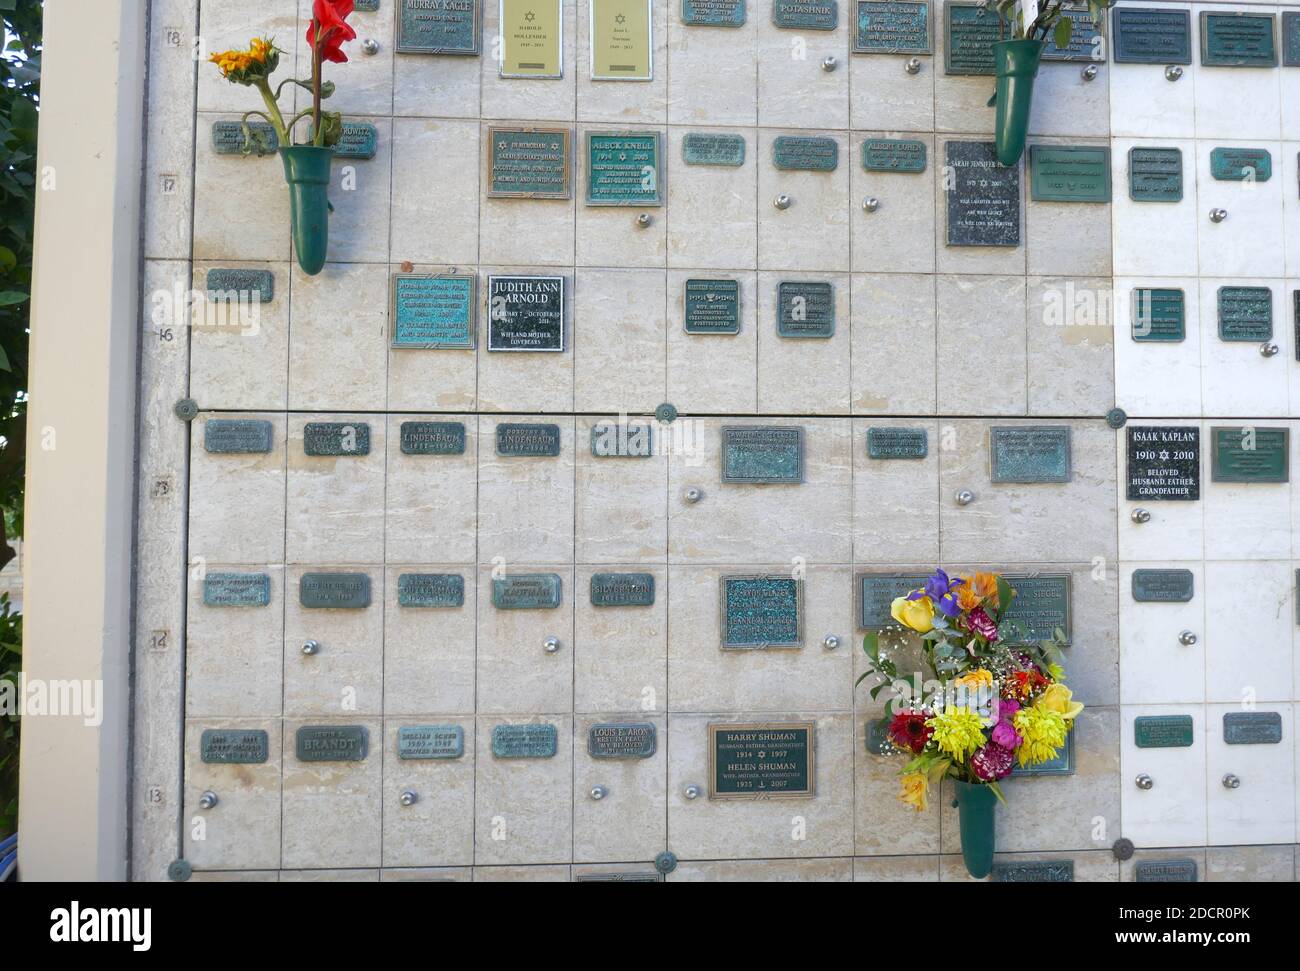 Los Angeles, California, USA 17th November 2020 A general view of atmosphere of actor Norman Fell's Grave at Mount Sinai Cemetery Hollywood Hills on November 17, 2020 in Los Angeles, California, USA. Photo by Barry King/Alamy Stock Photo Stock Photo